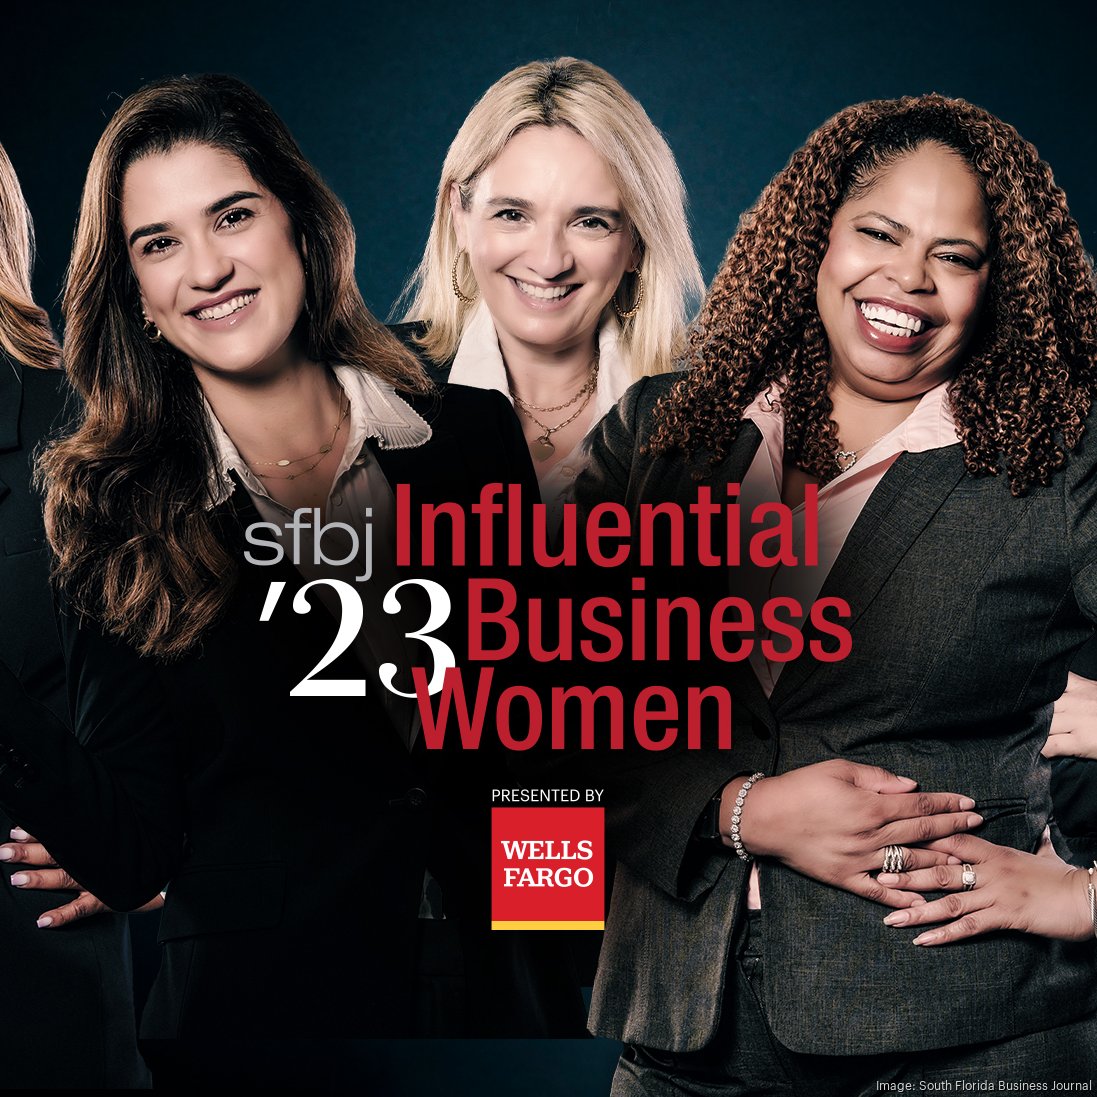 Honoring the South Florida Business Journals 2023 Influential Business Women